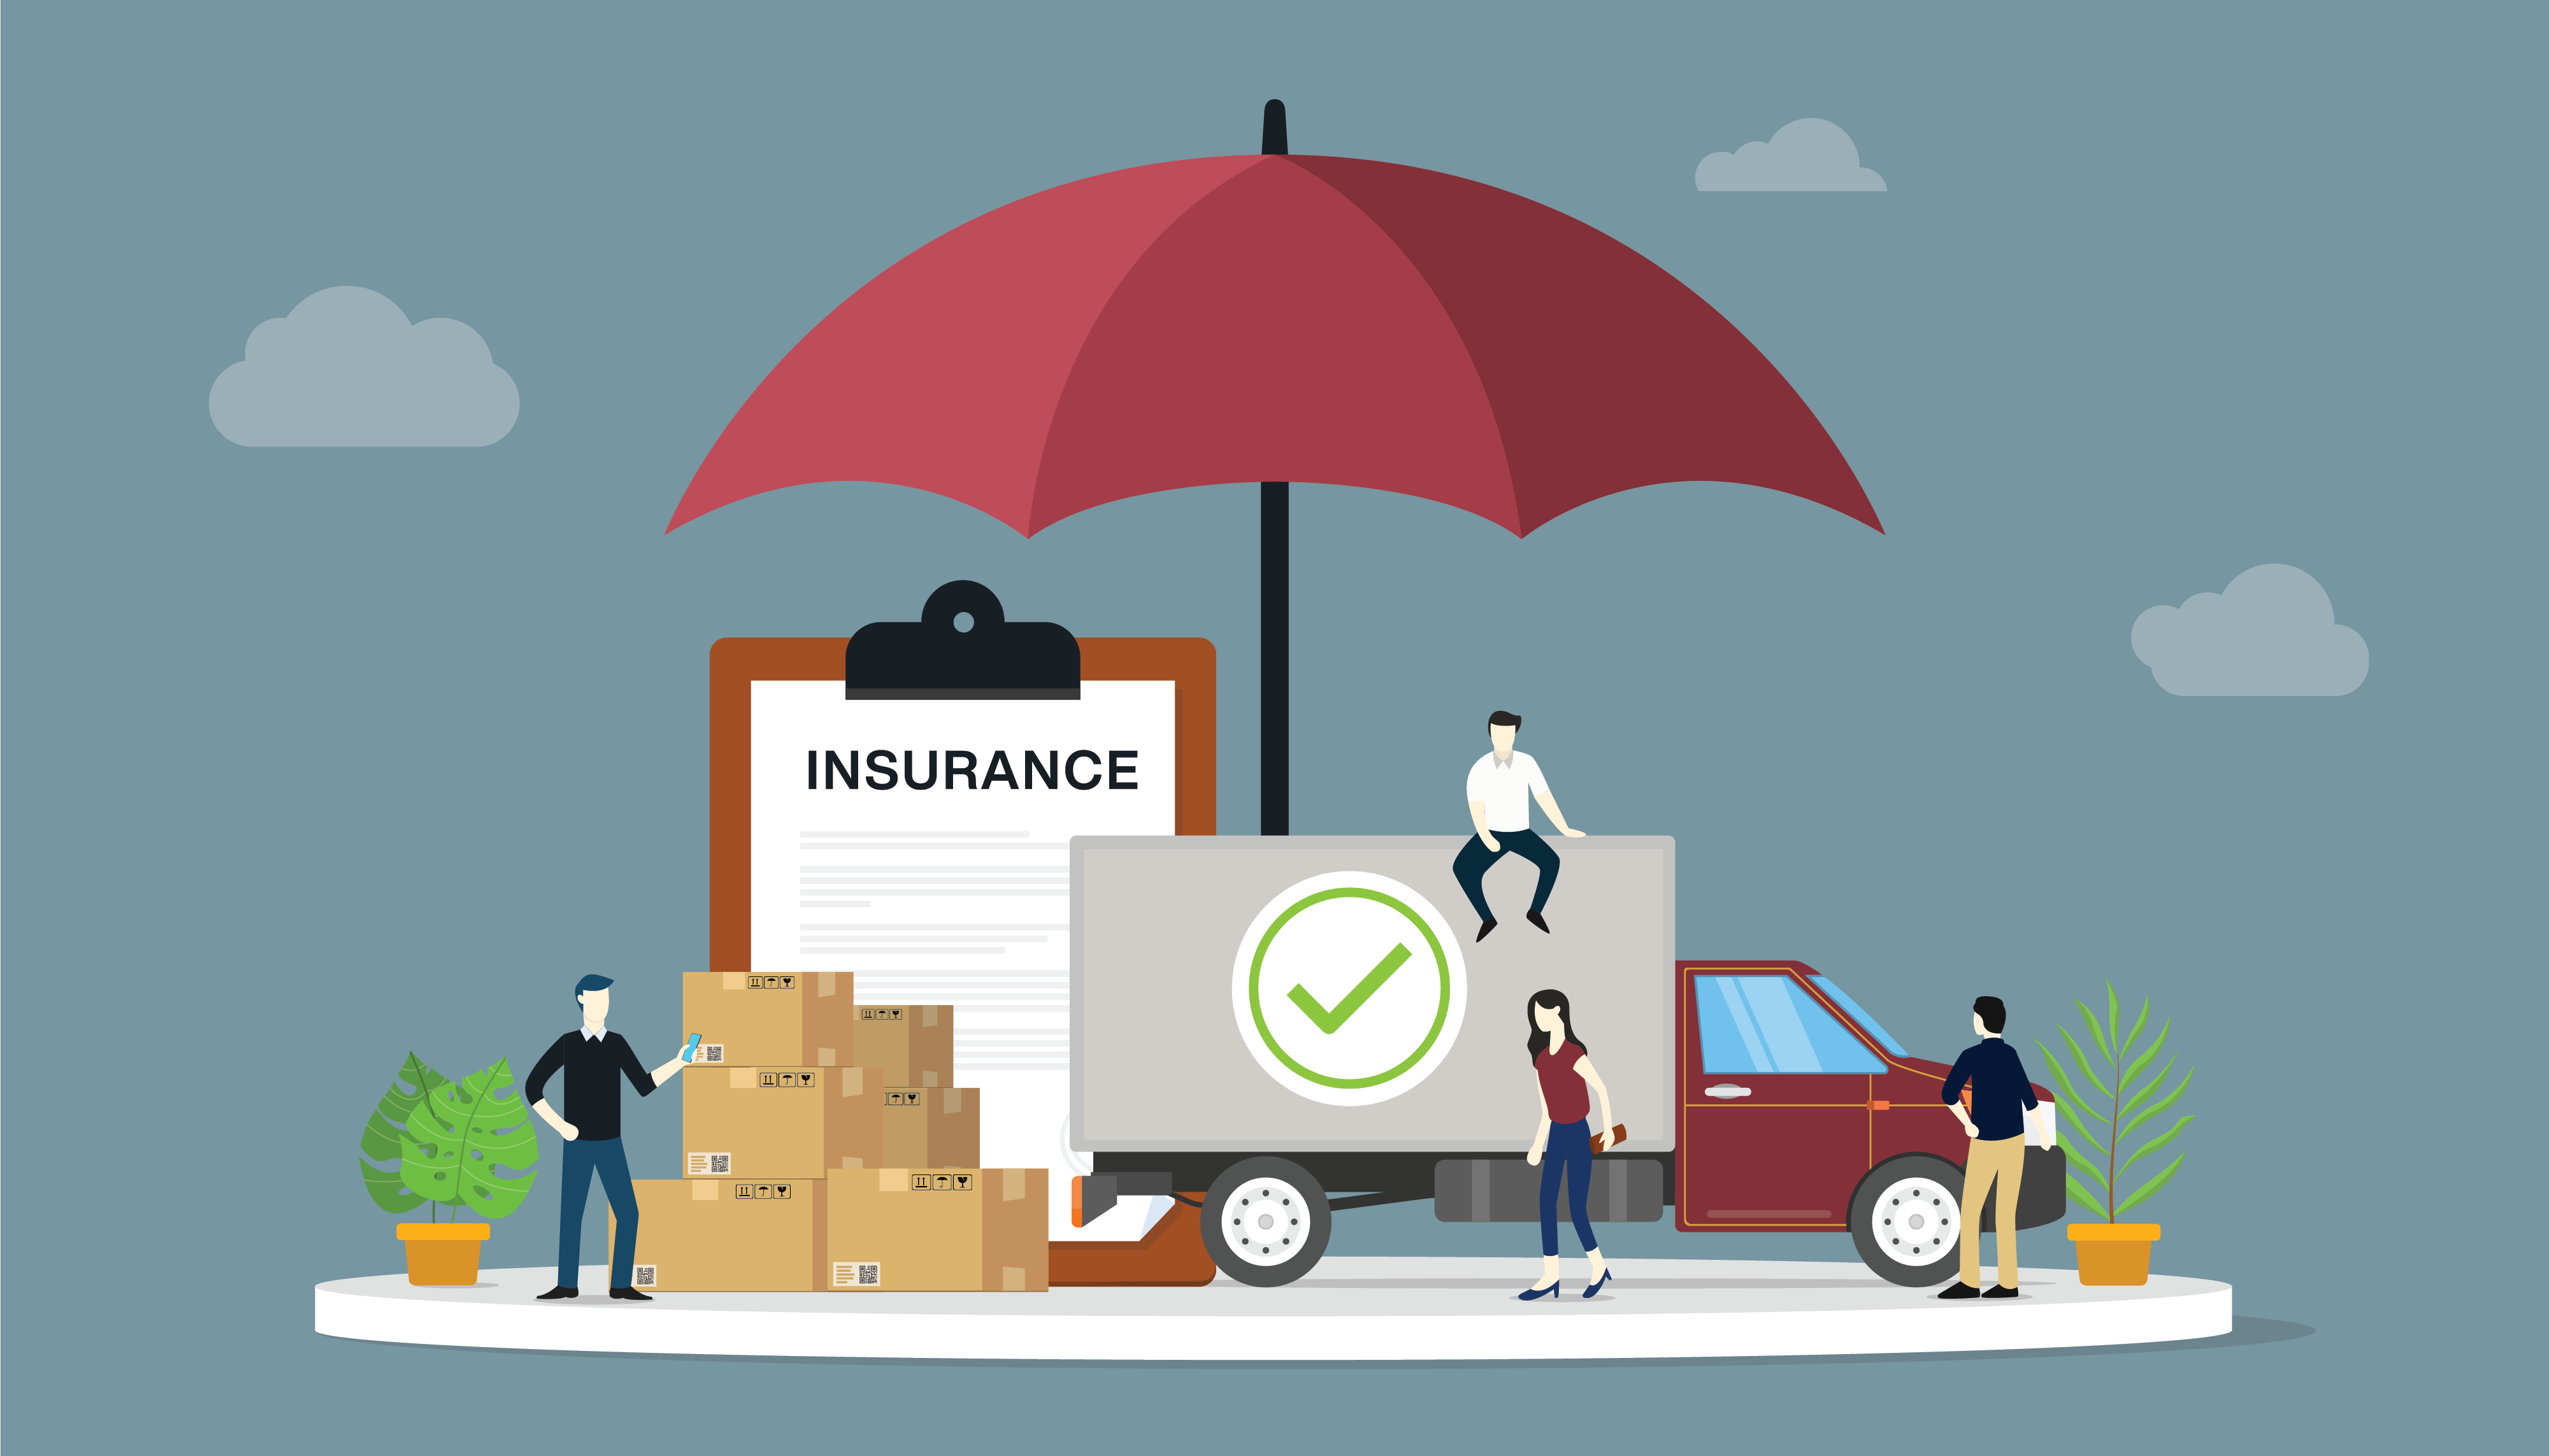 Shop with Confidence: Free Returns, Exchanges & Shipping Insurance on Orders up to $100